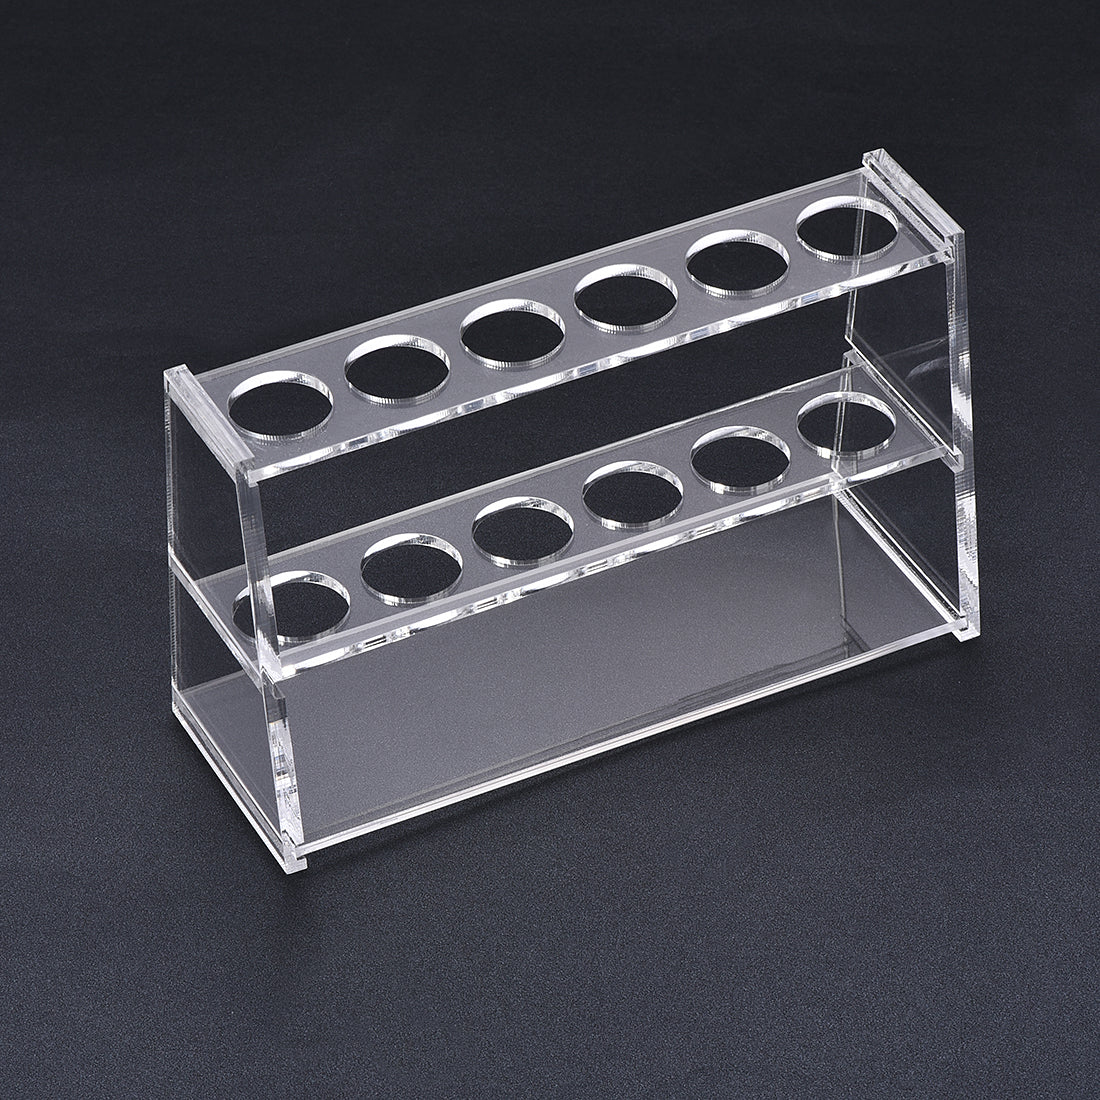 uxcell Uxcell Acrylic Test Tube Holder Rack 6 Wells for 25ml Centrifuge Tubes Clear